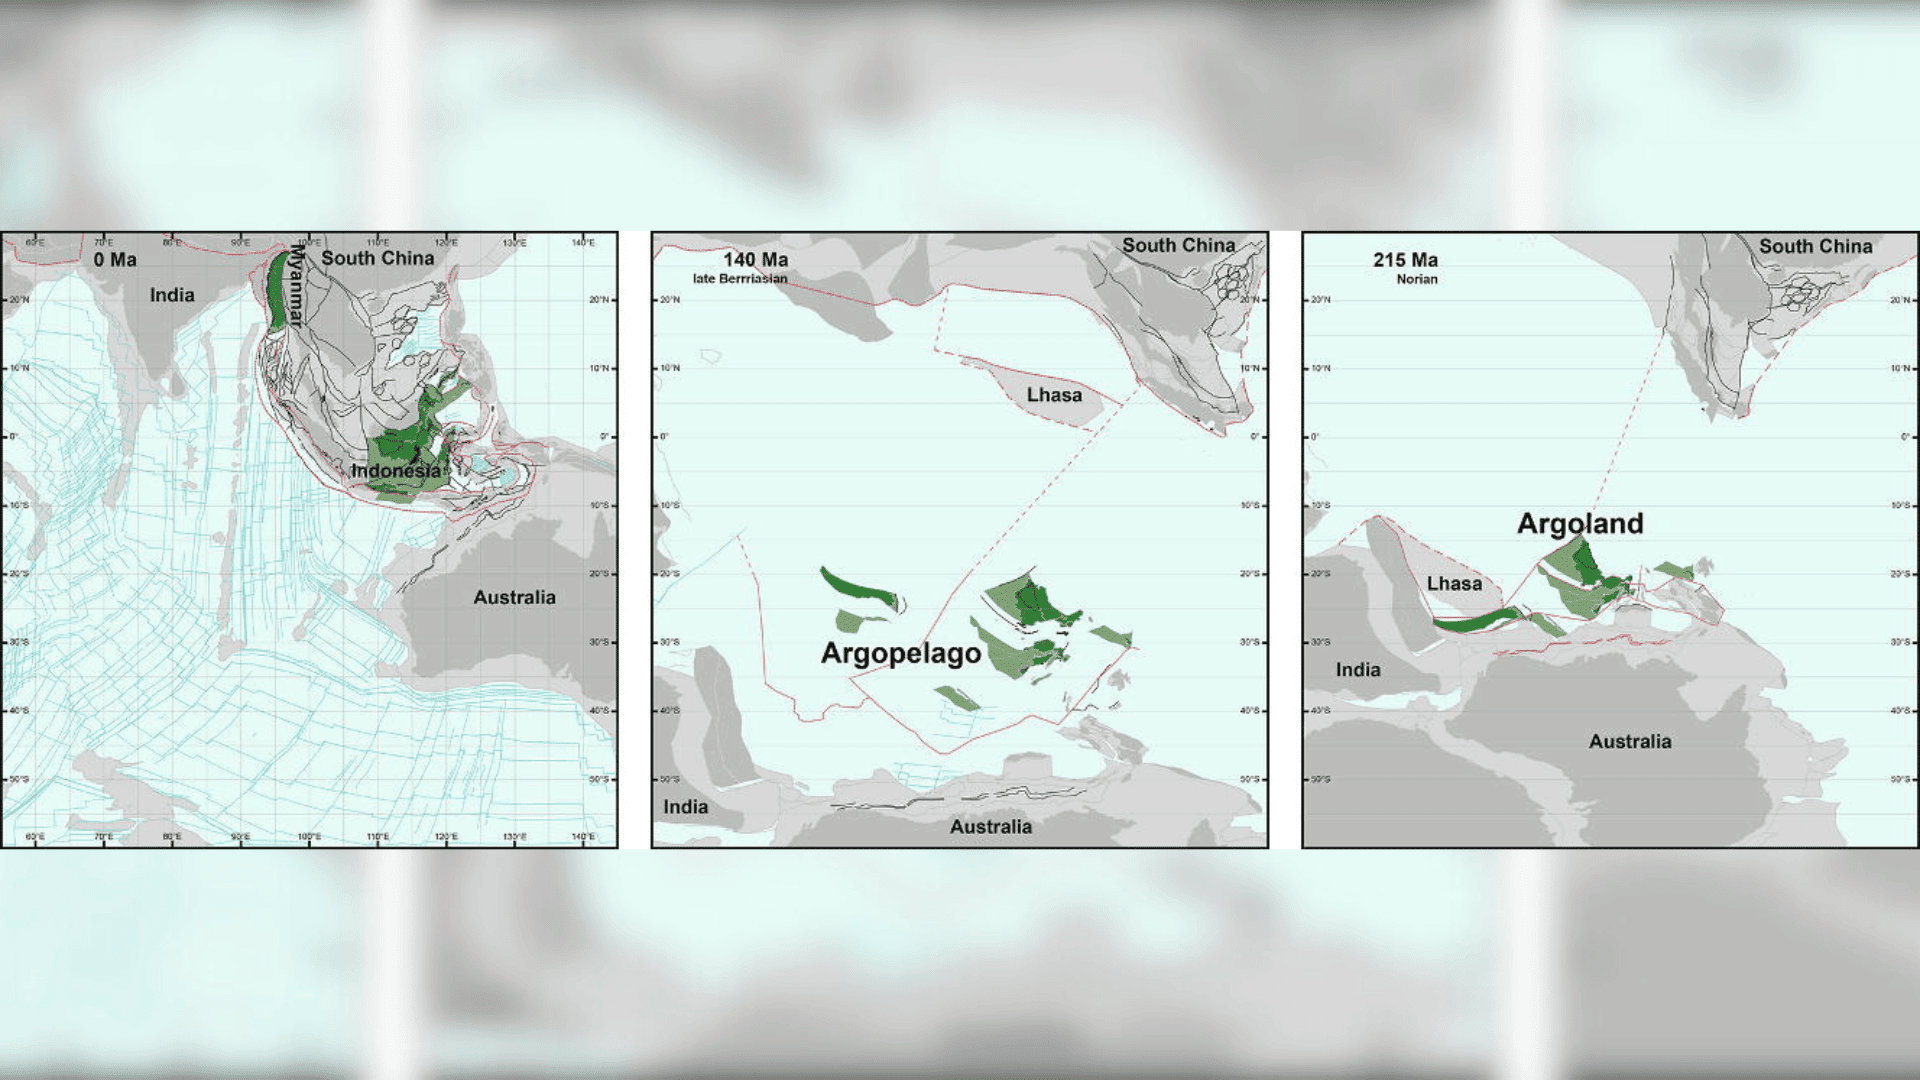 Map of Argoland Lost Continent Discovered